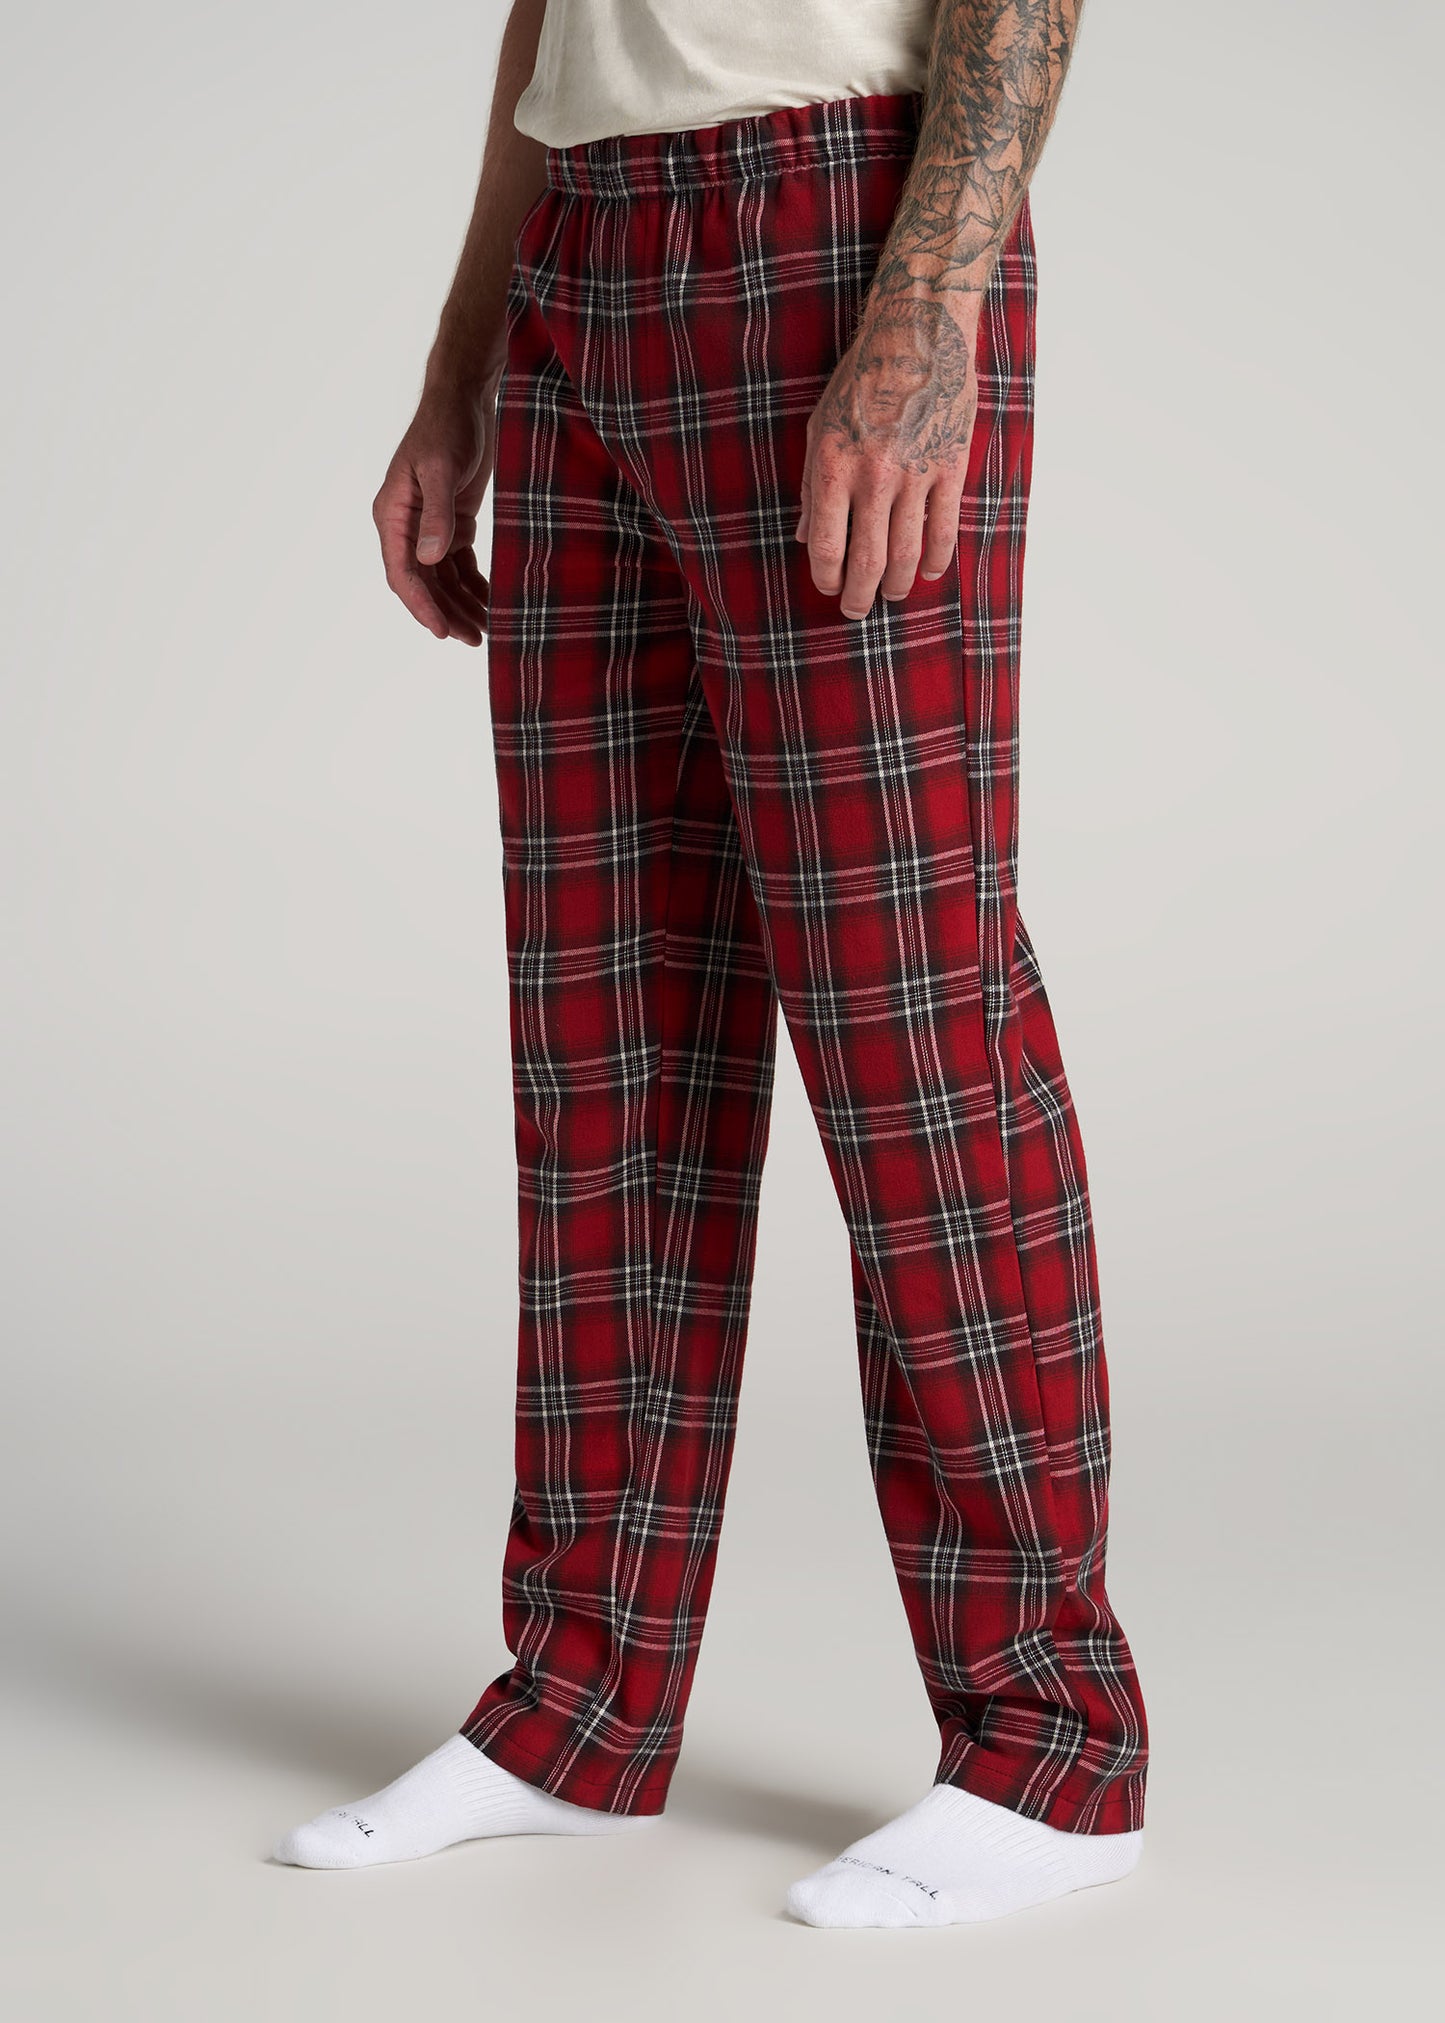       American-Tall-Men-Flannel-Pajamas-Red-White-Plaid-side